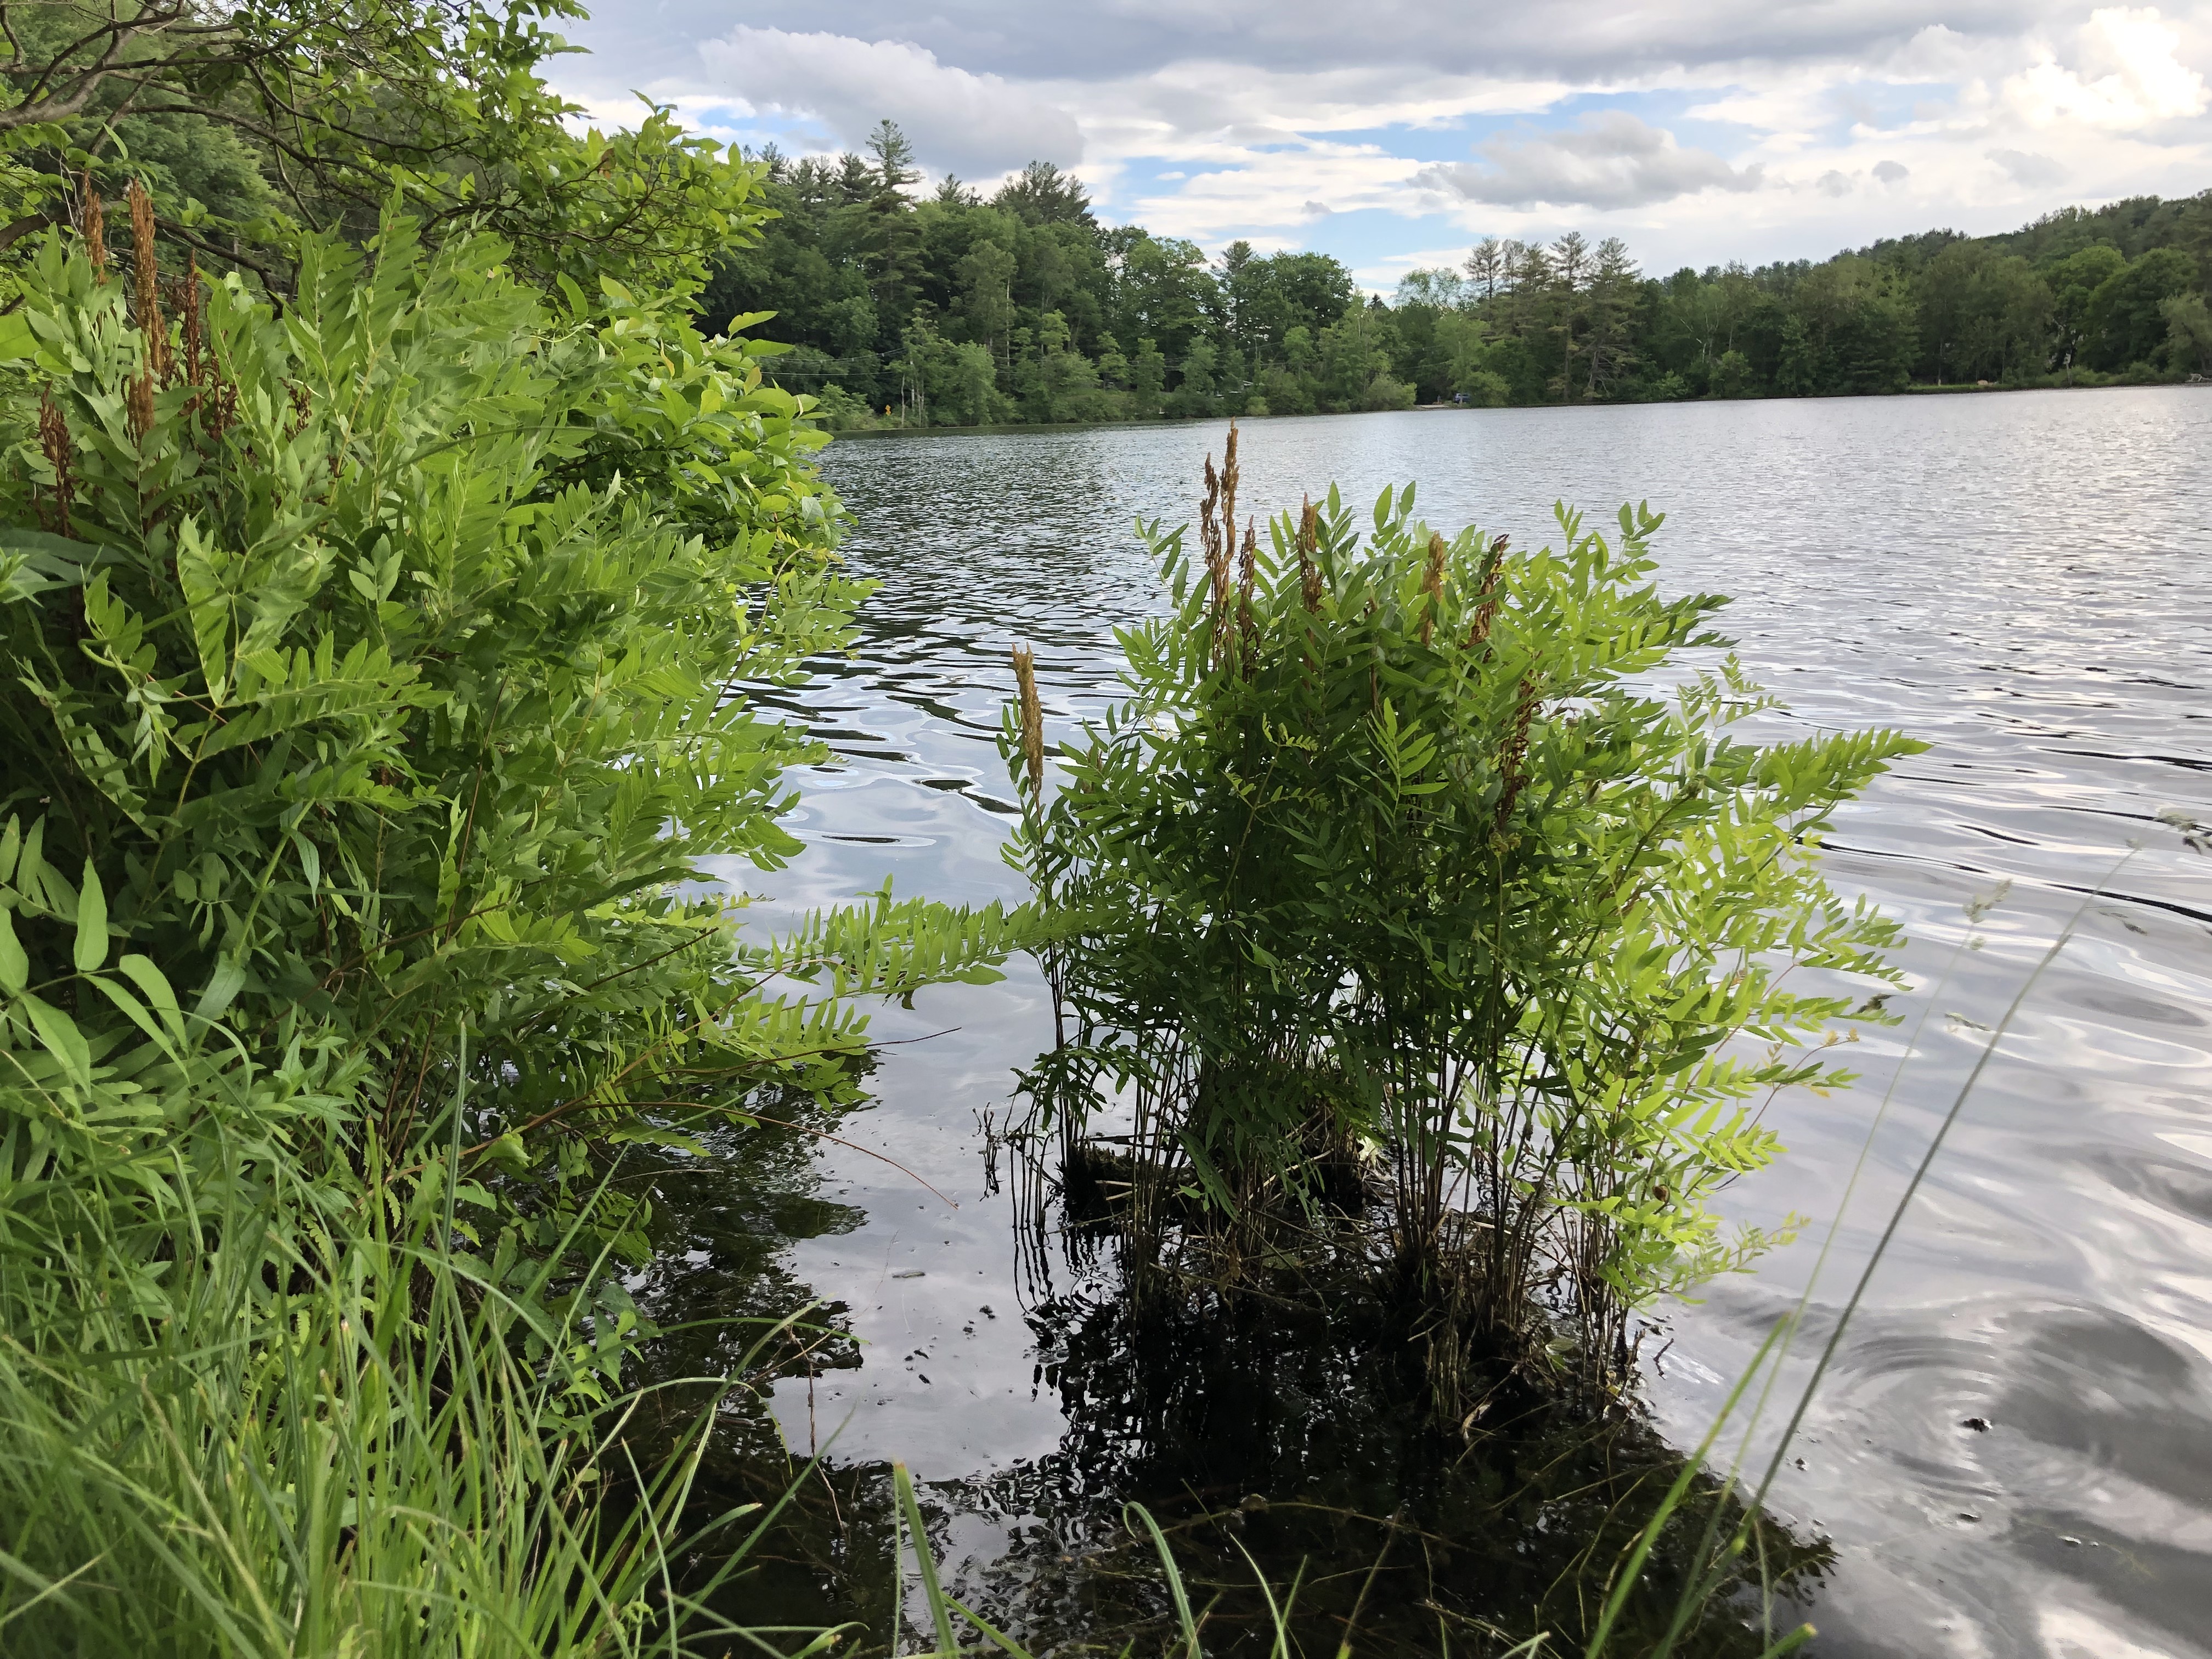 Volunteers needed to inventory plants at Lake Mansfield in midsummer 